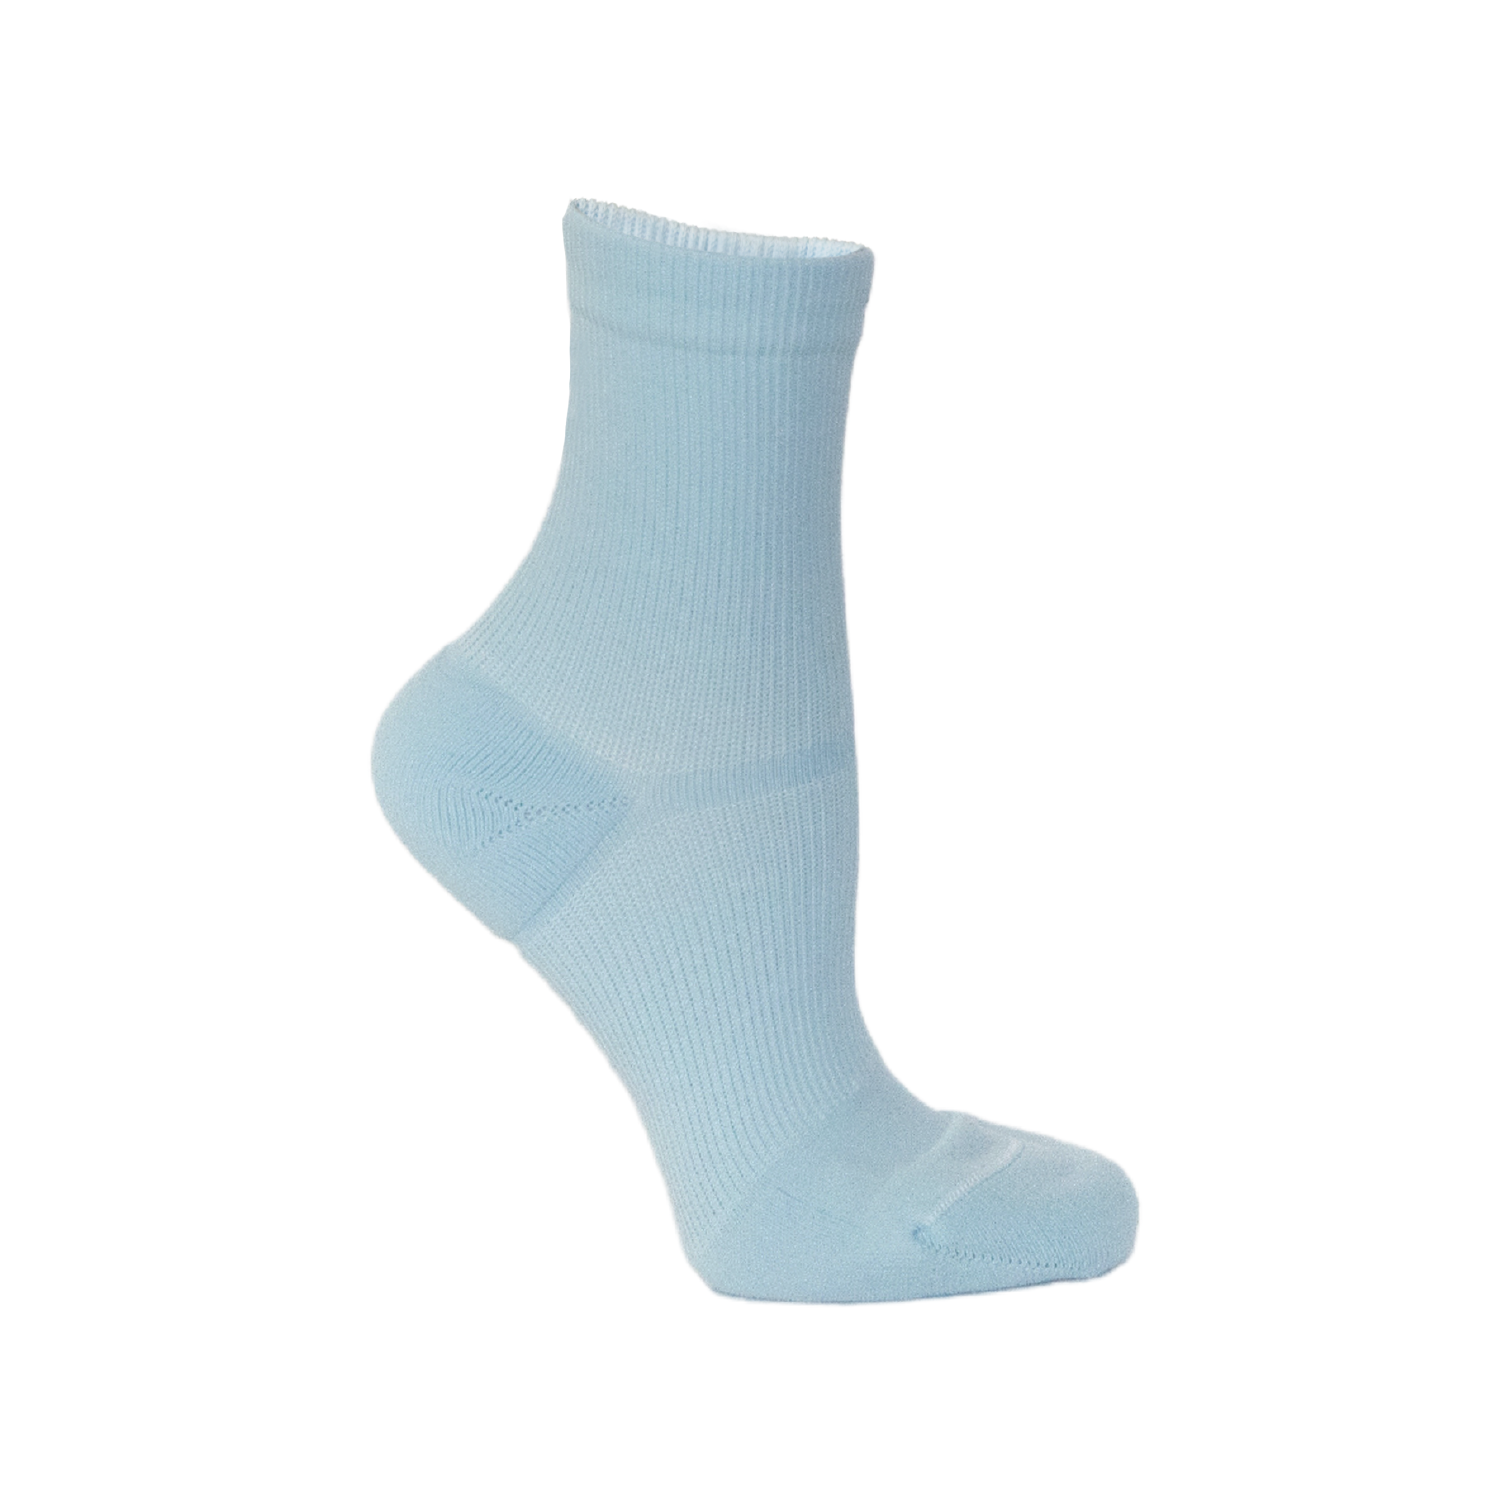 shoppers love these $15 non-slip socks that are perfect for